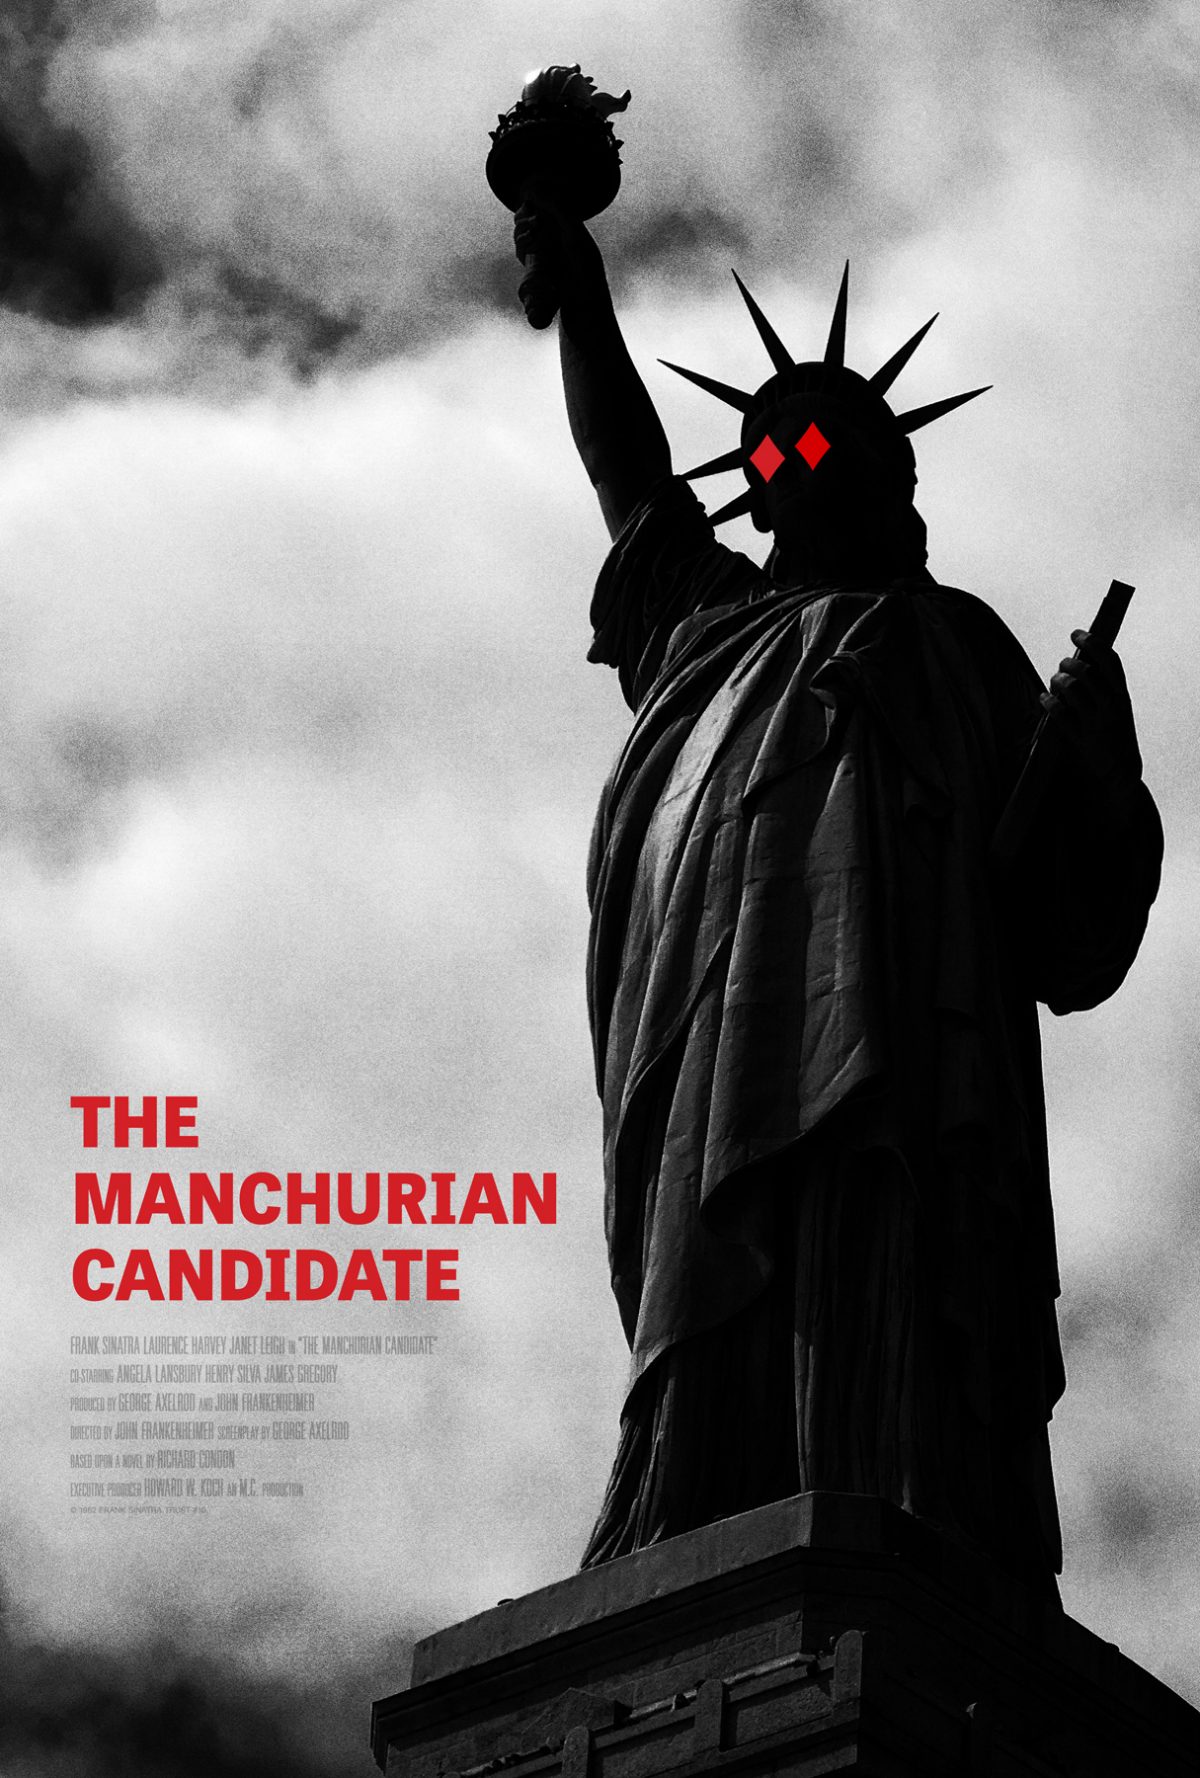 what is the manchurian candidate about